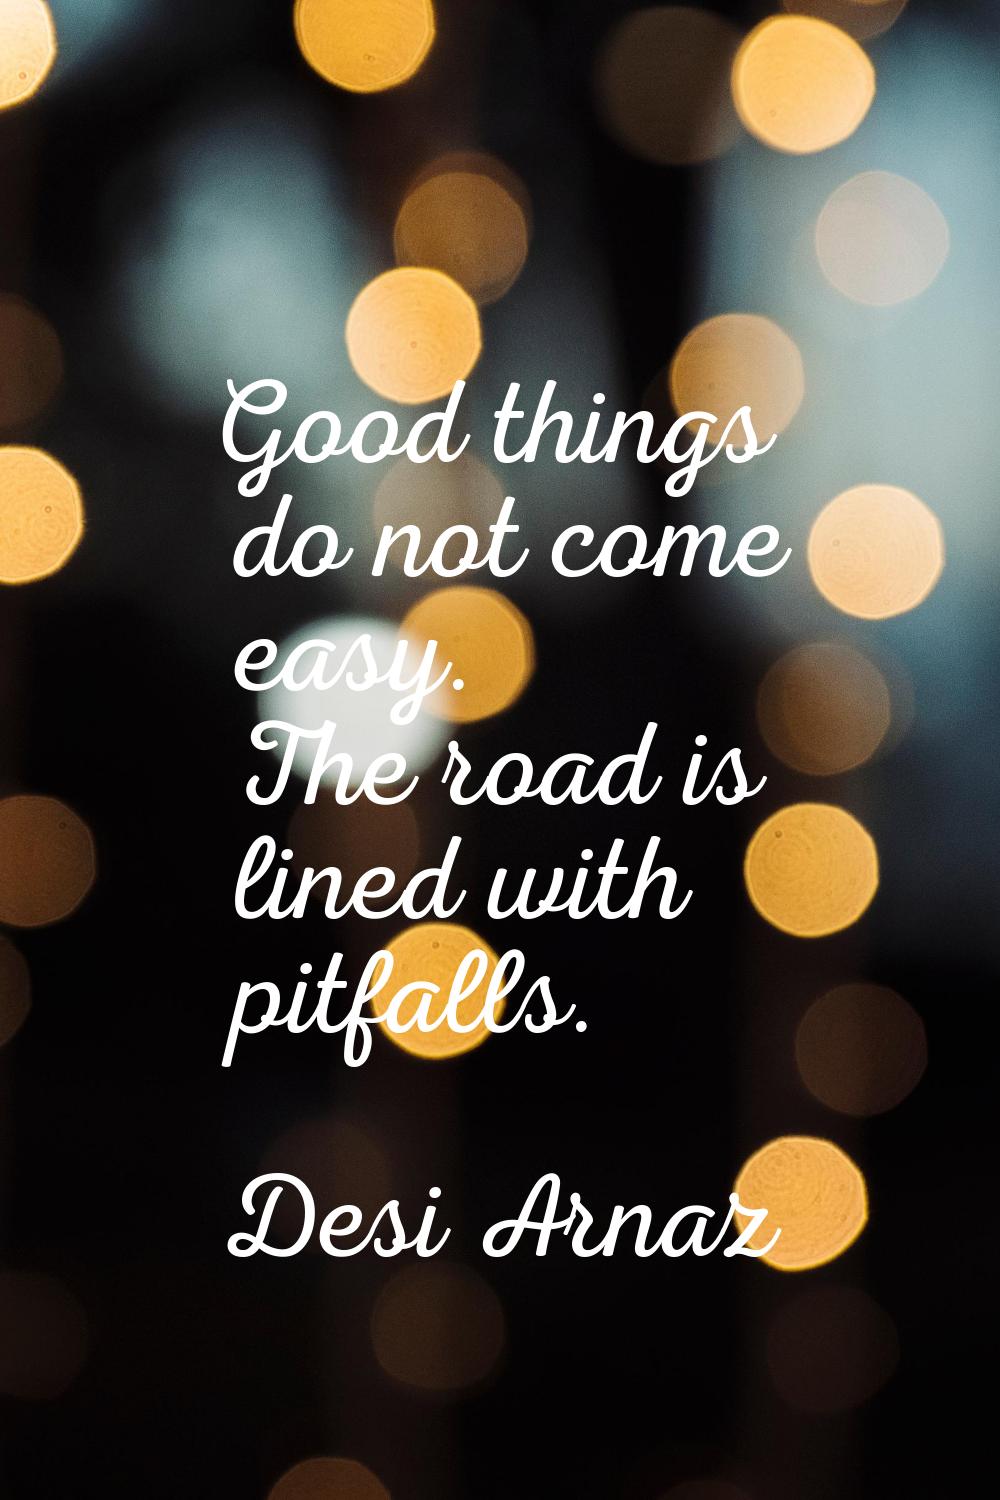 Good things do not come easy. The road is lined with pitfalls.